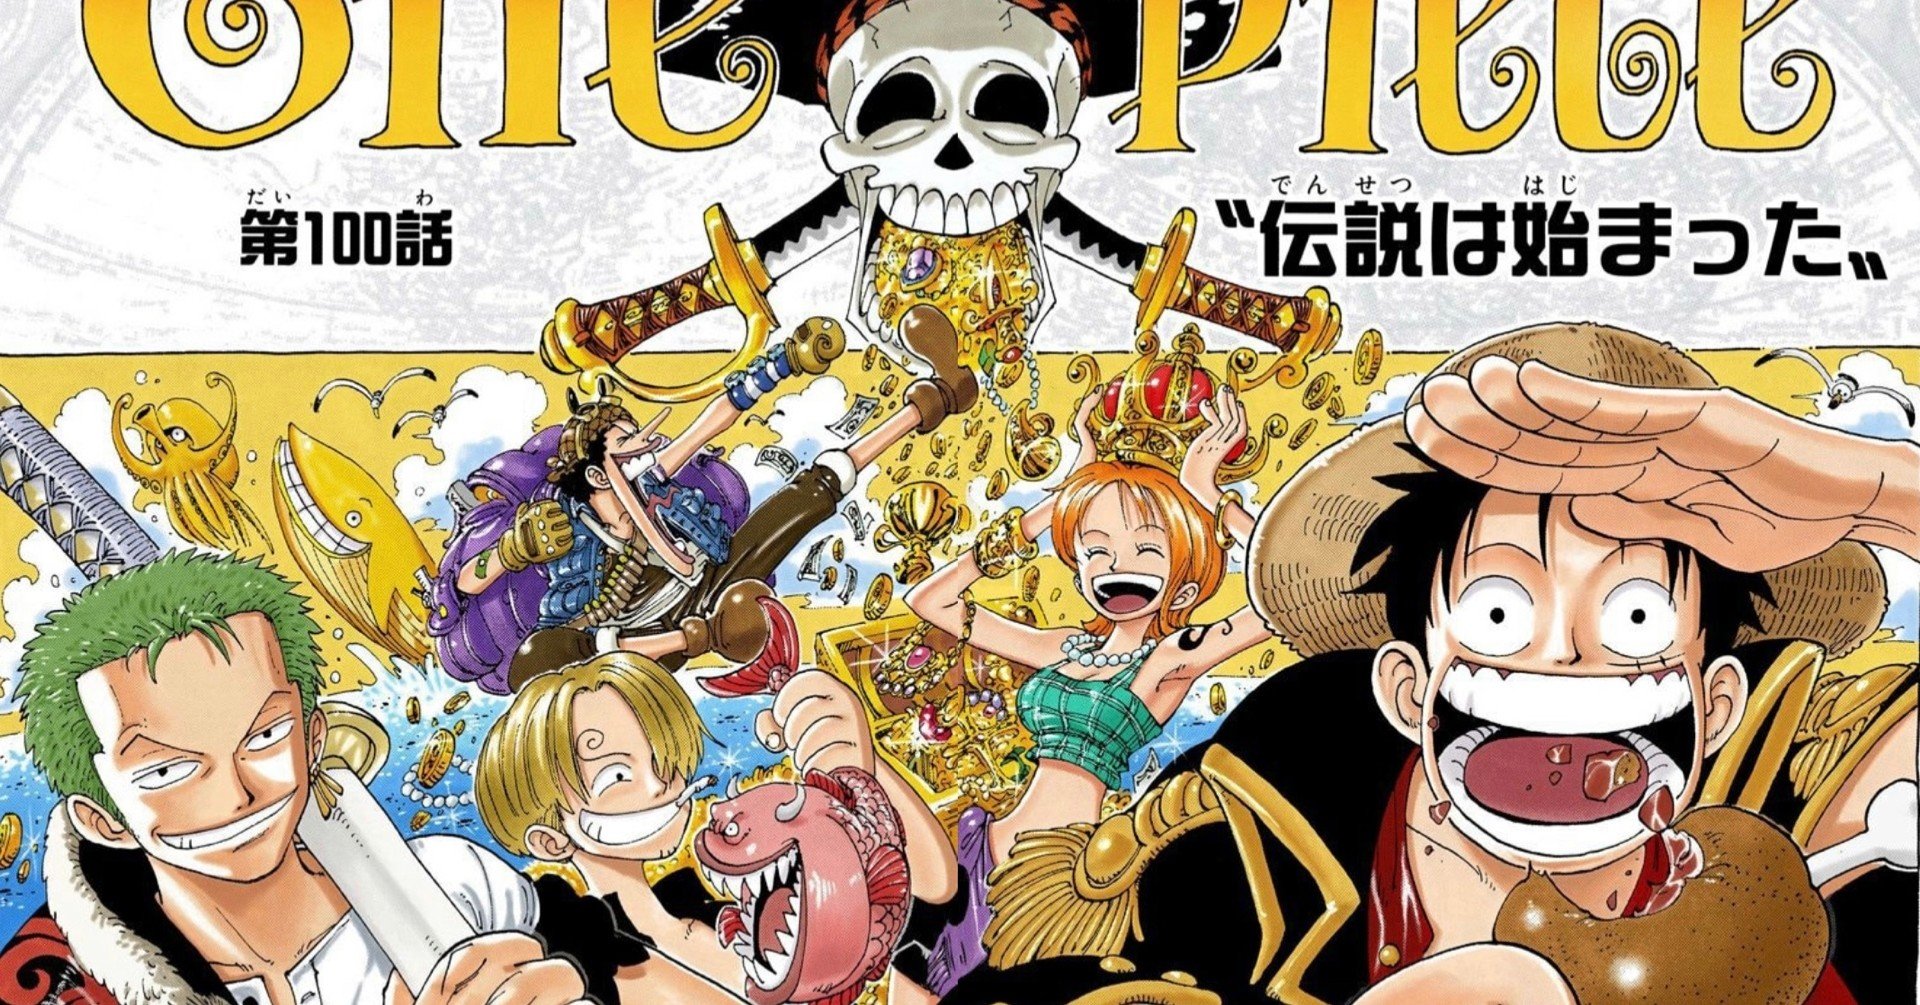 Telecharger One Piece 1000 扉絵 アニメリアクション画像